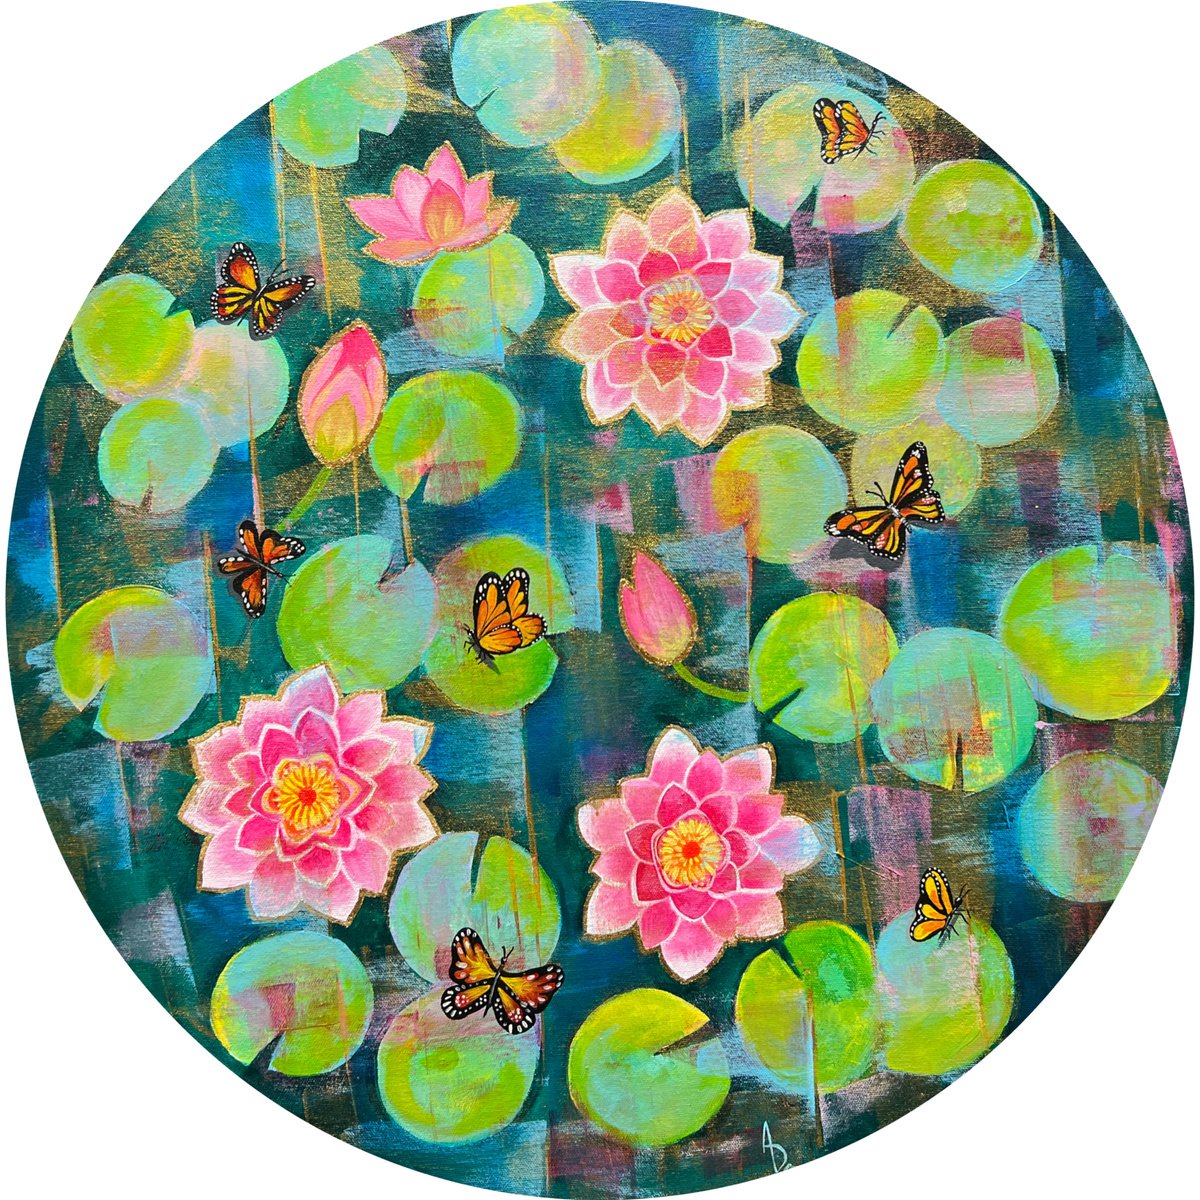 Water Lilies and Butterflies by Amita Dand